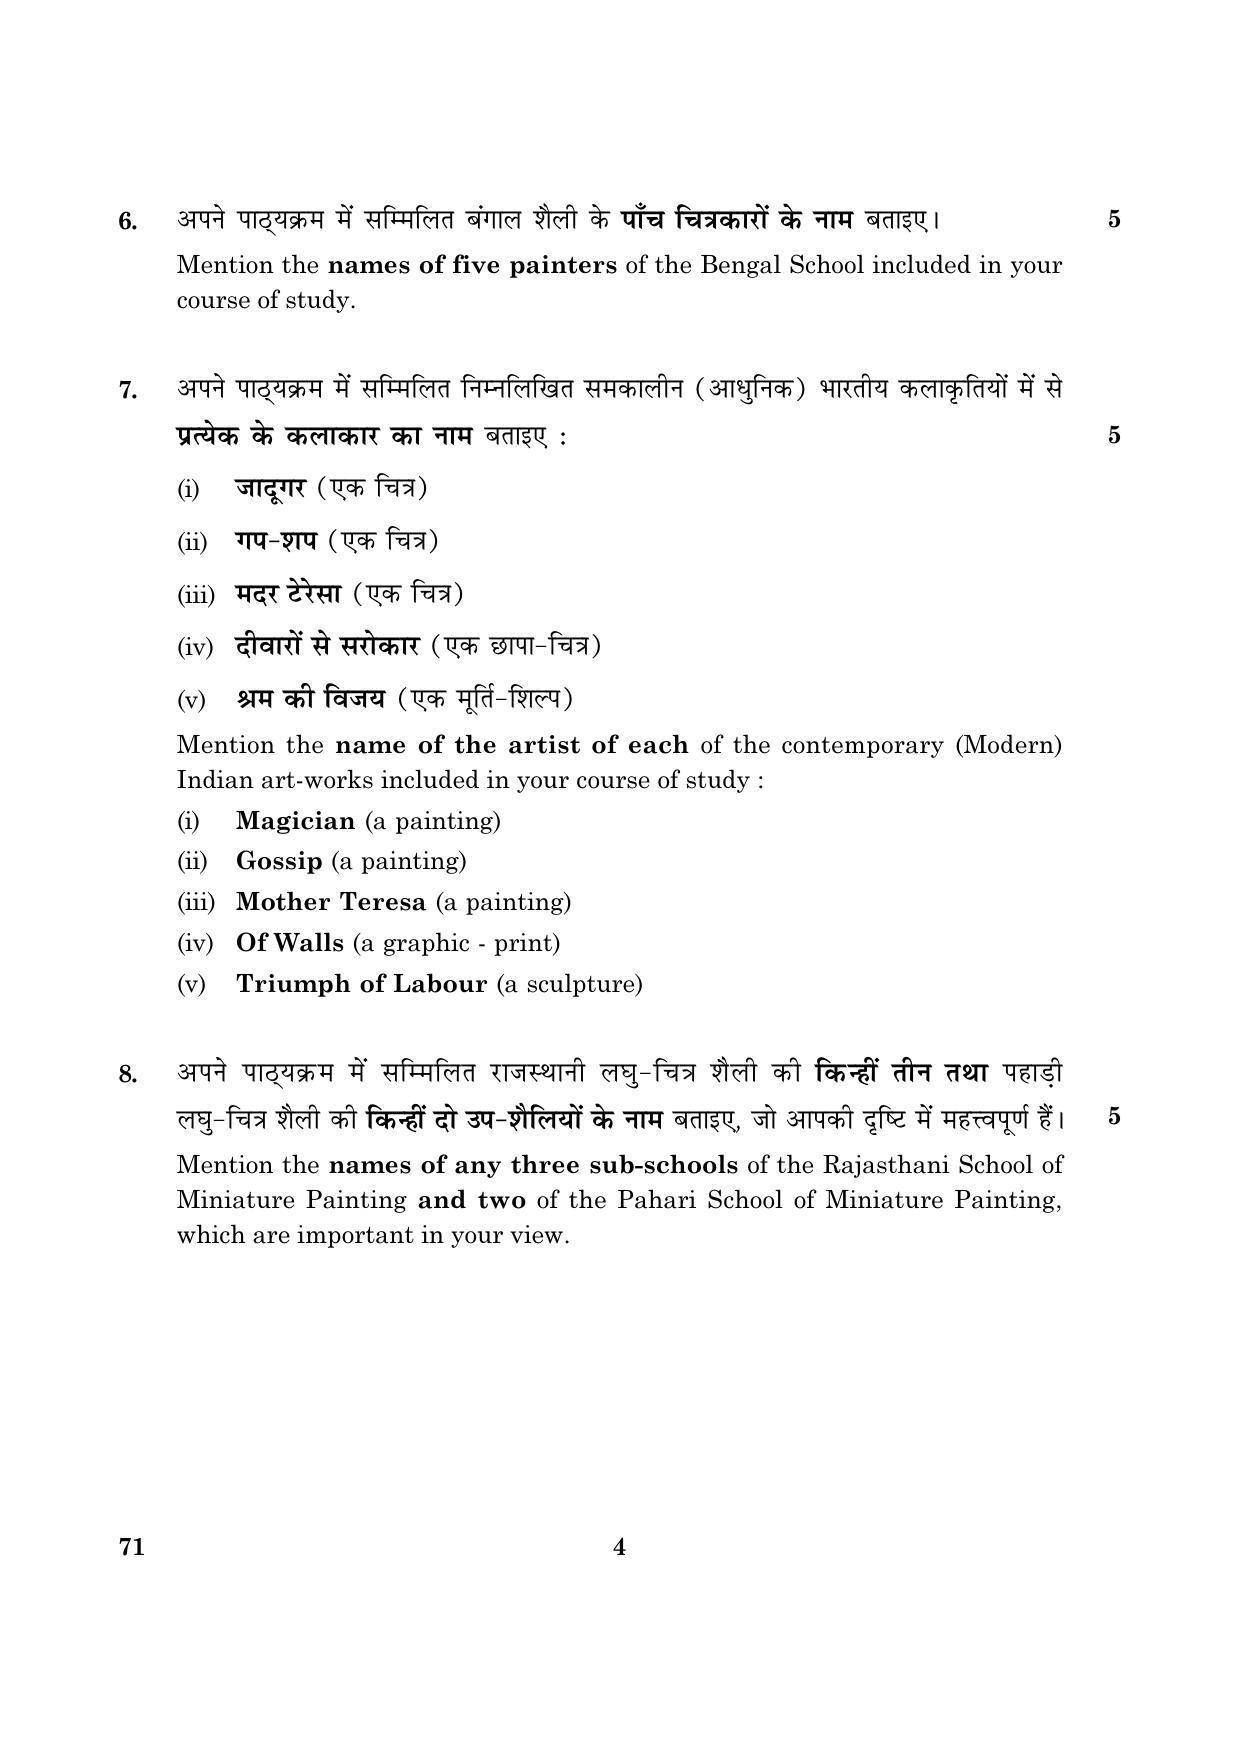 CBSE Class 12 071 Painting (Theory) 2016 Question Paper - Page 4